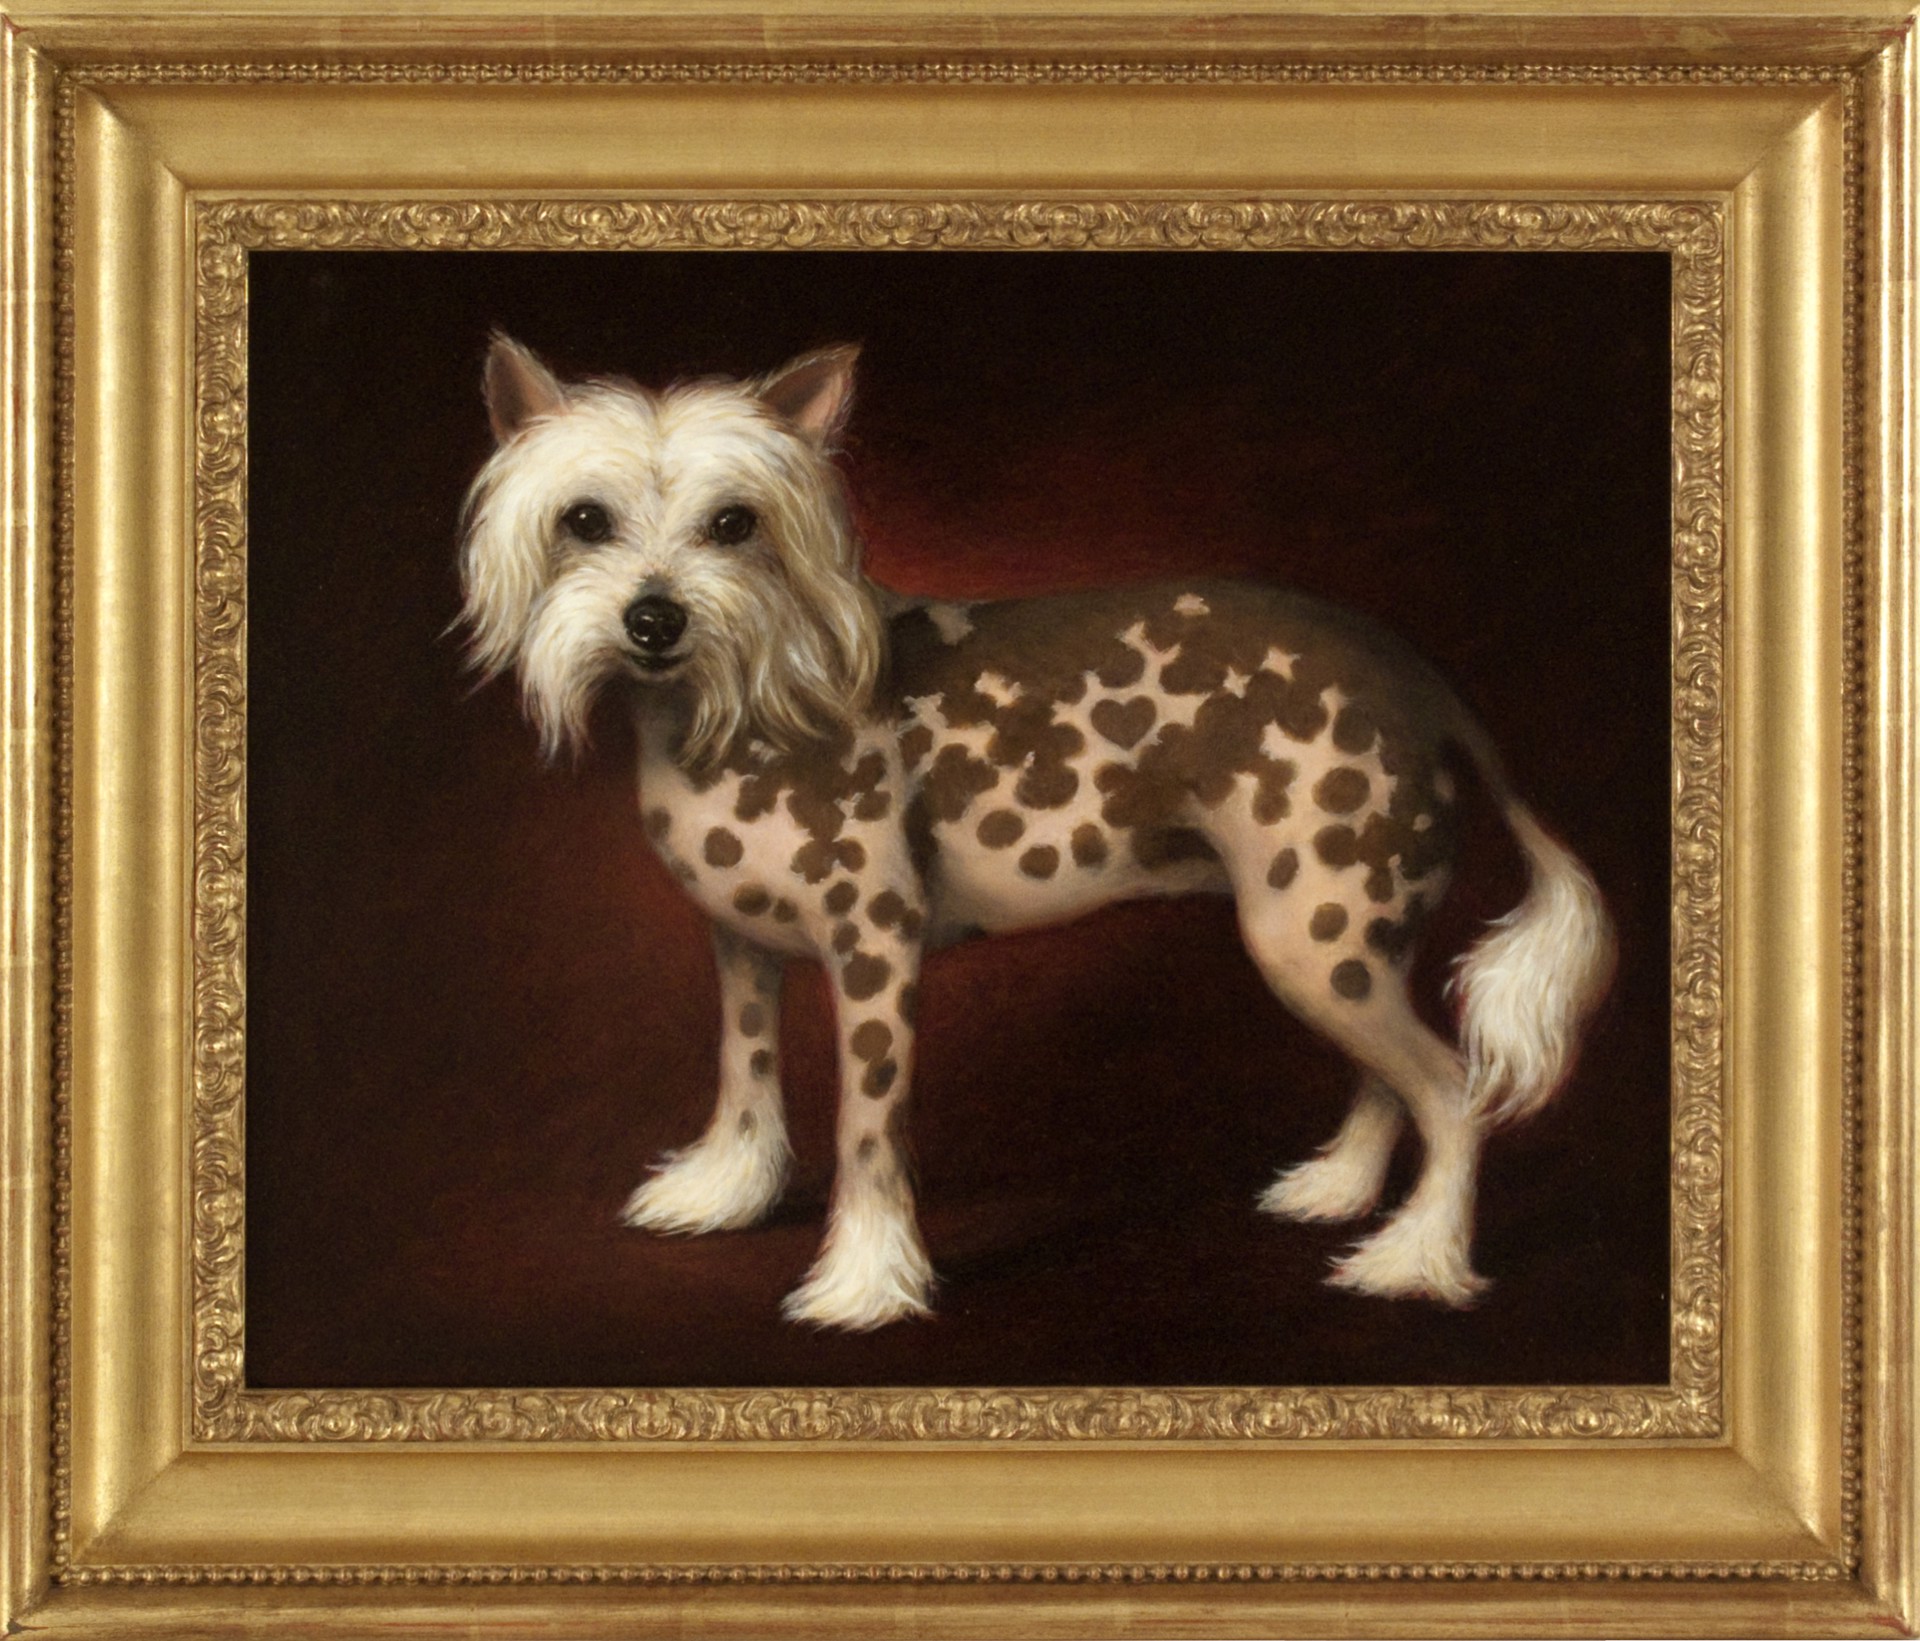 Chinese Crested, 1990 by Christine Merrill